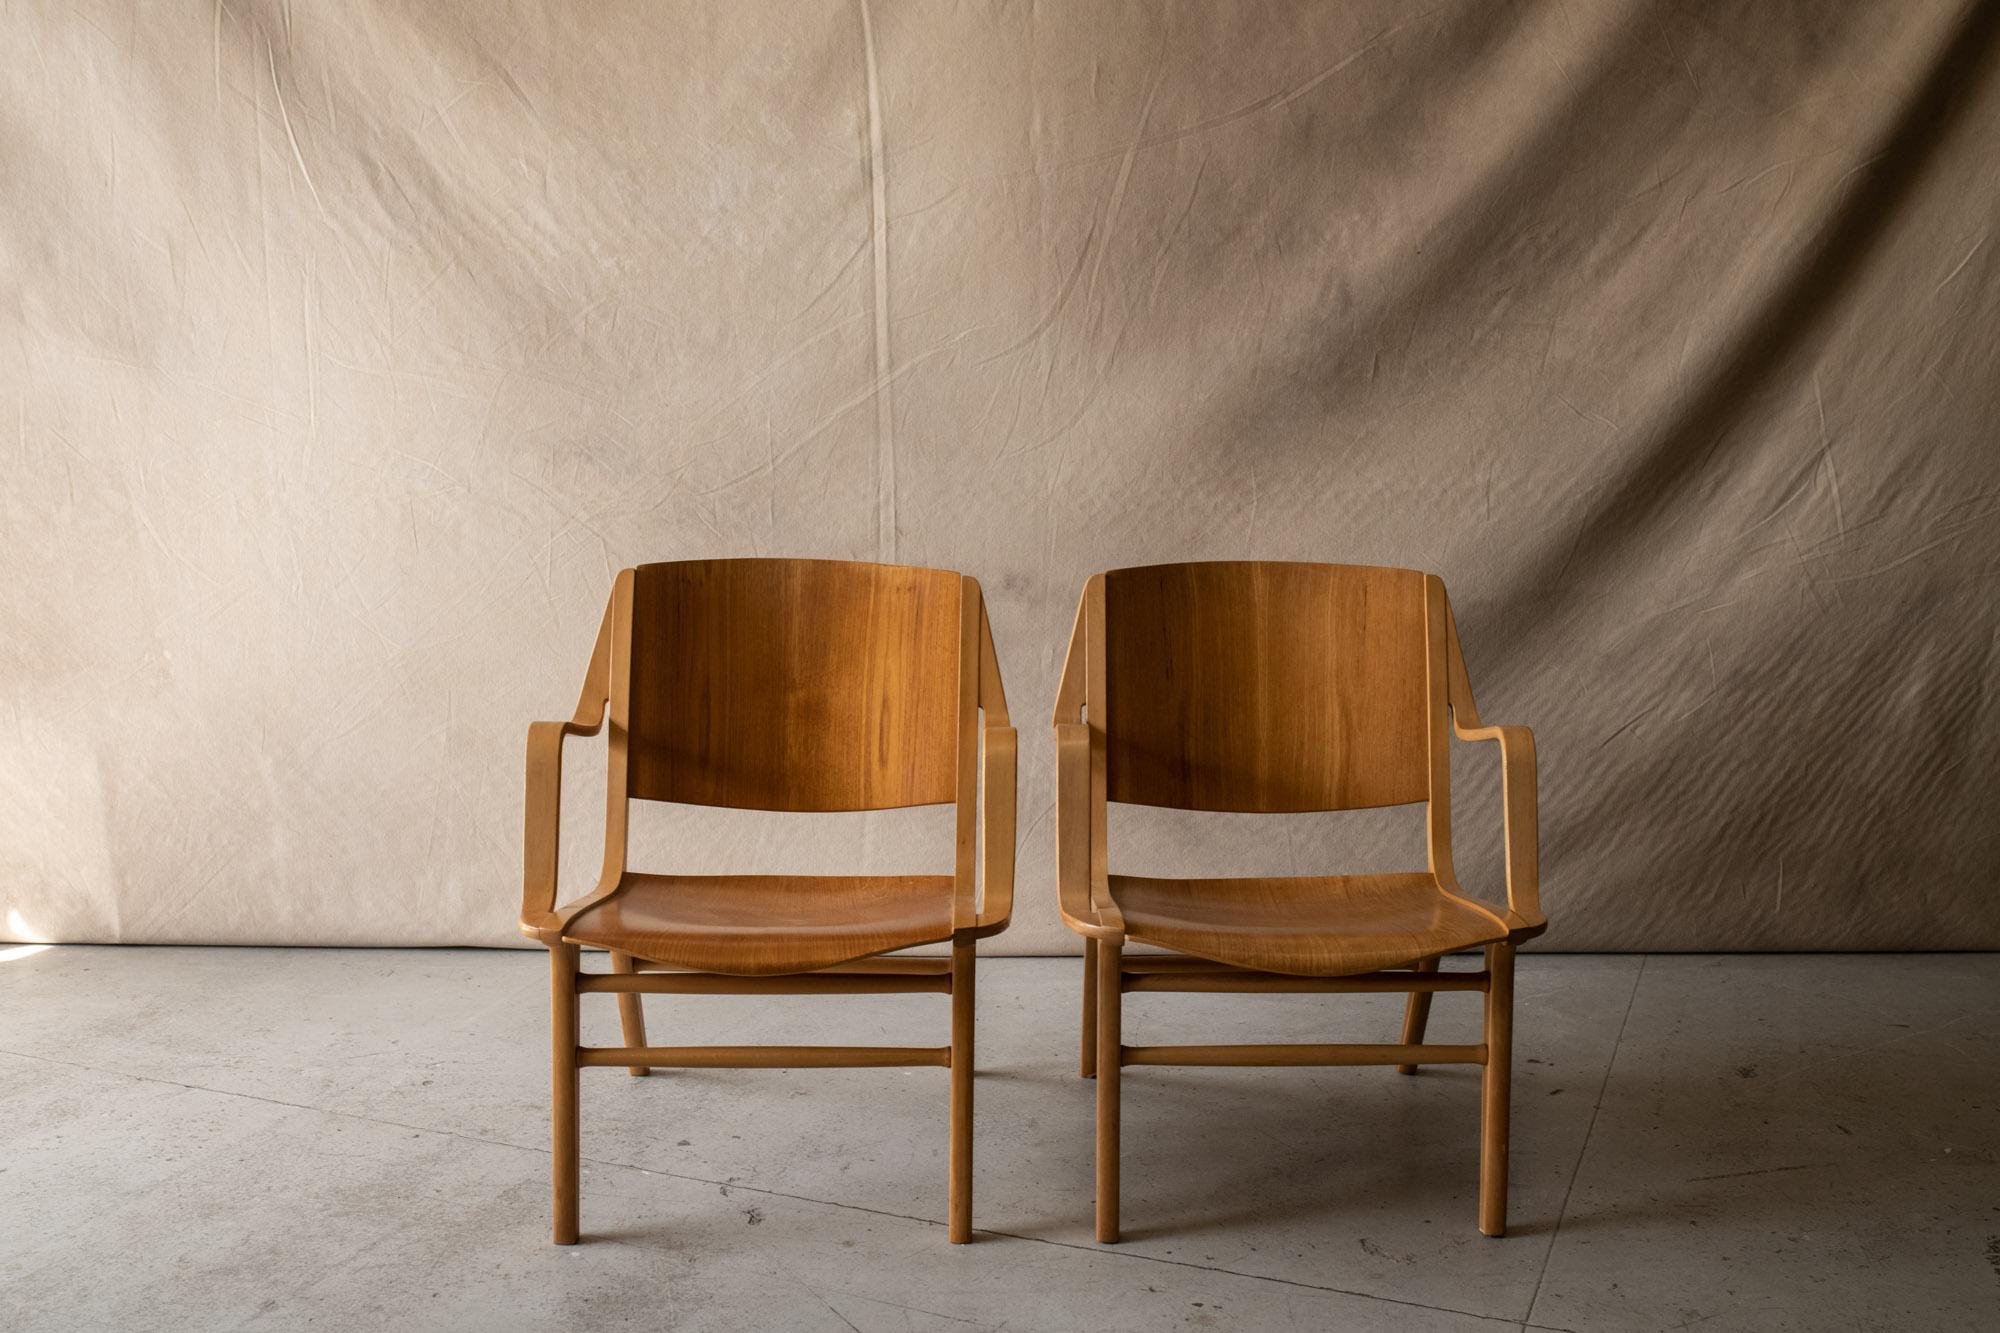 Pair of Peter Hvidt & Orla Mølgaard Nielsen Lounge Chairs, Model Ax, Circa 1960.  Molded Teak and beech wood construction with nice wear and patina.

We don't have the time to write an exhausting description on each of our pieces. We find it